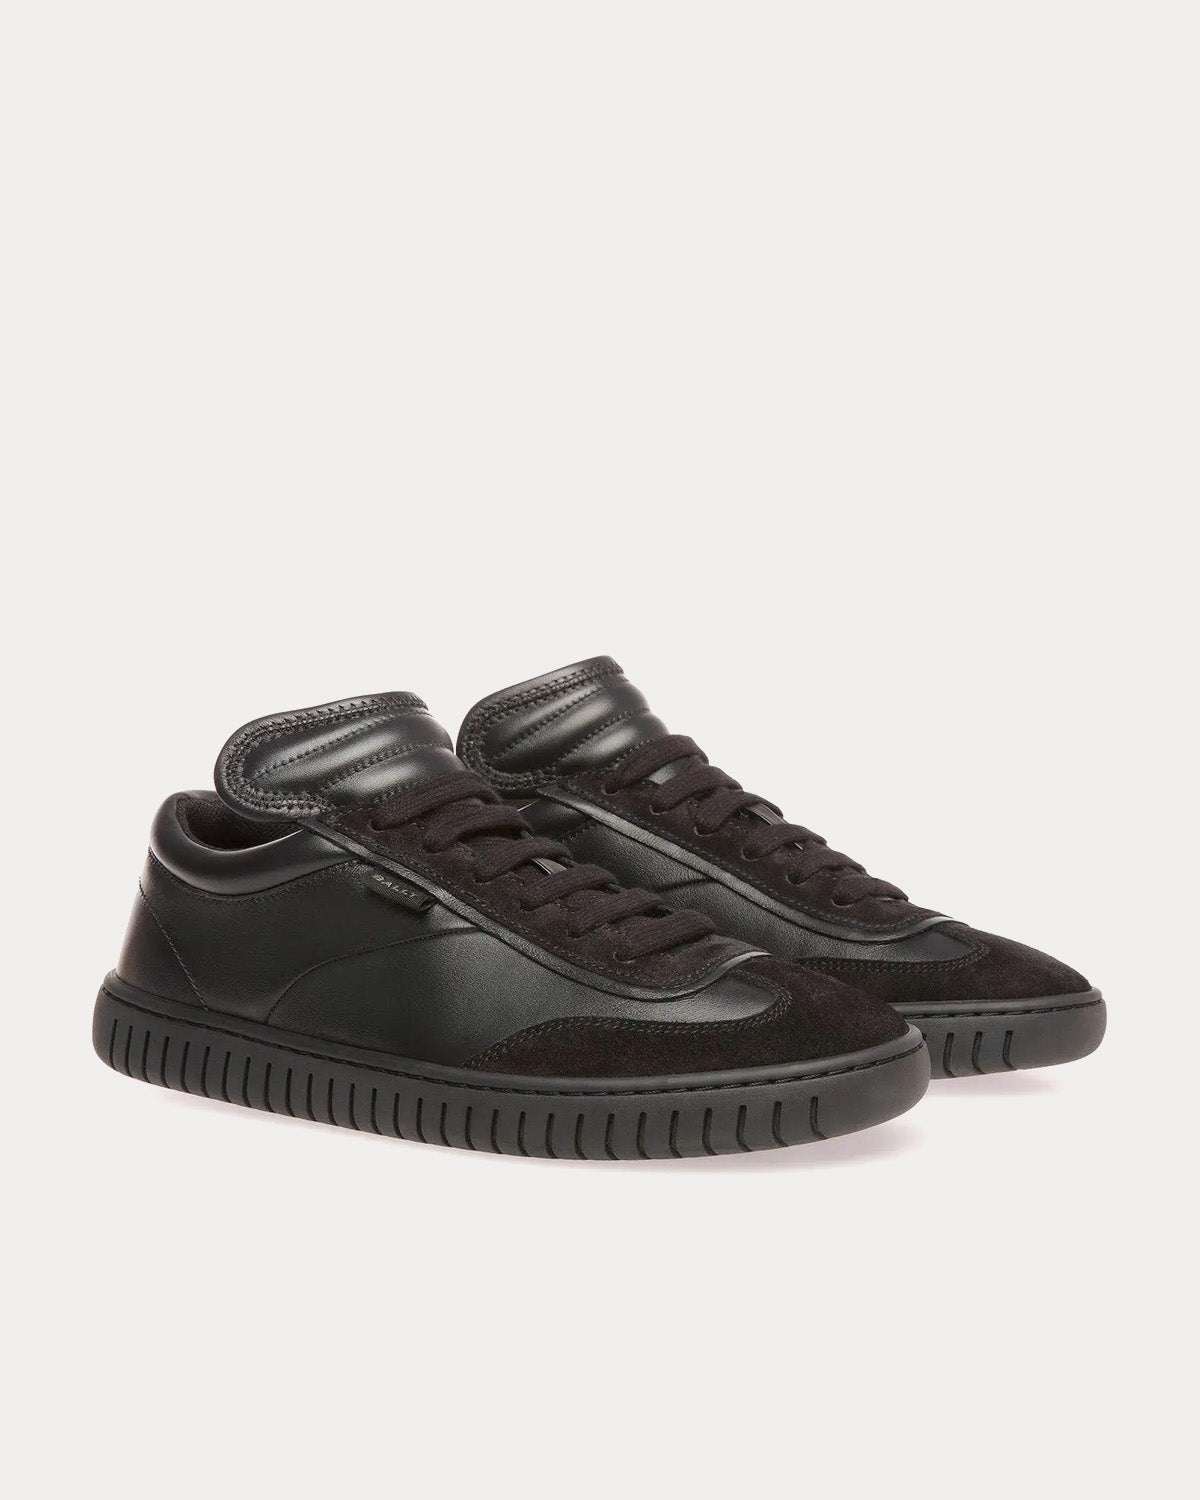 Bally - Player Leather & Suede Black Low Top Sneakers